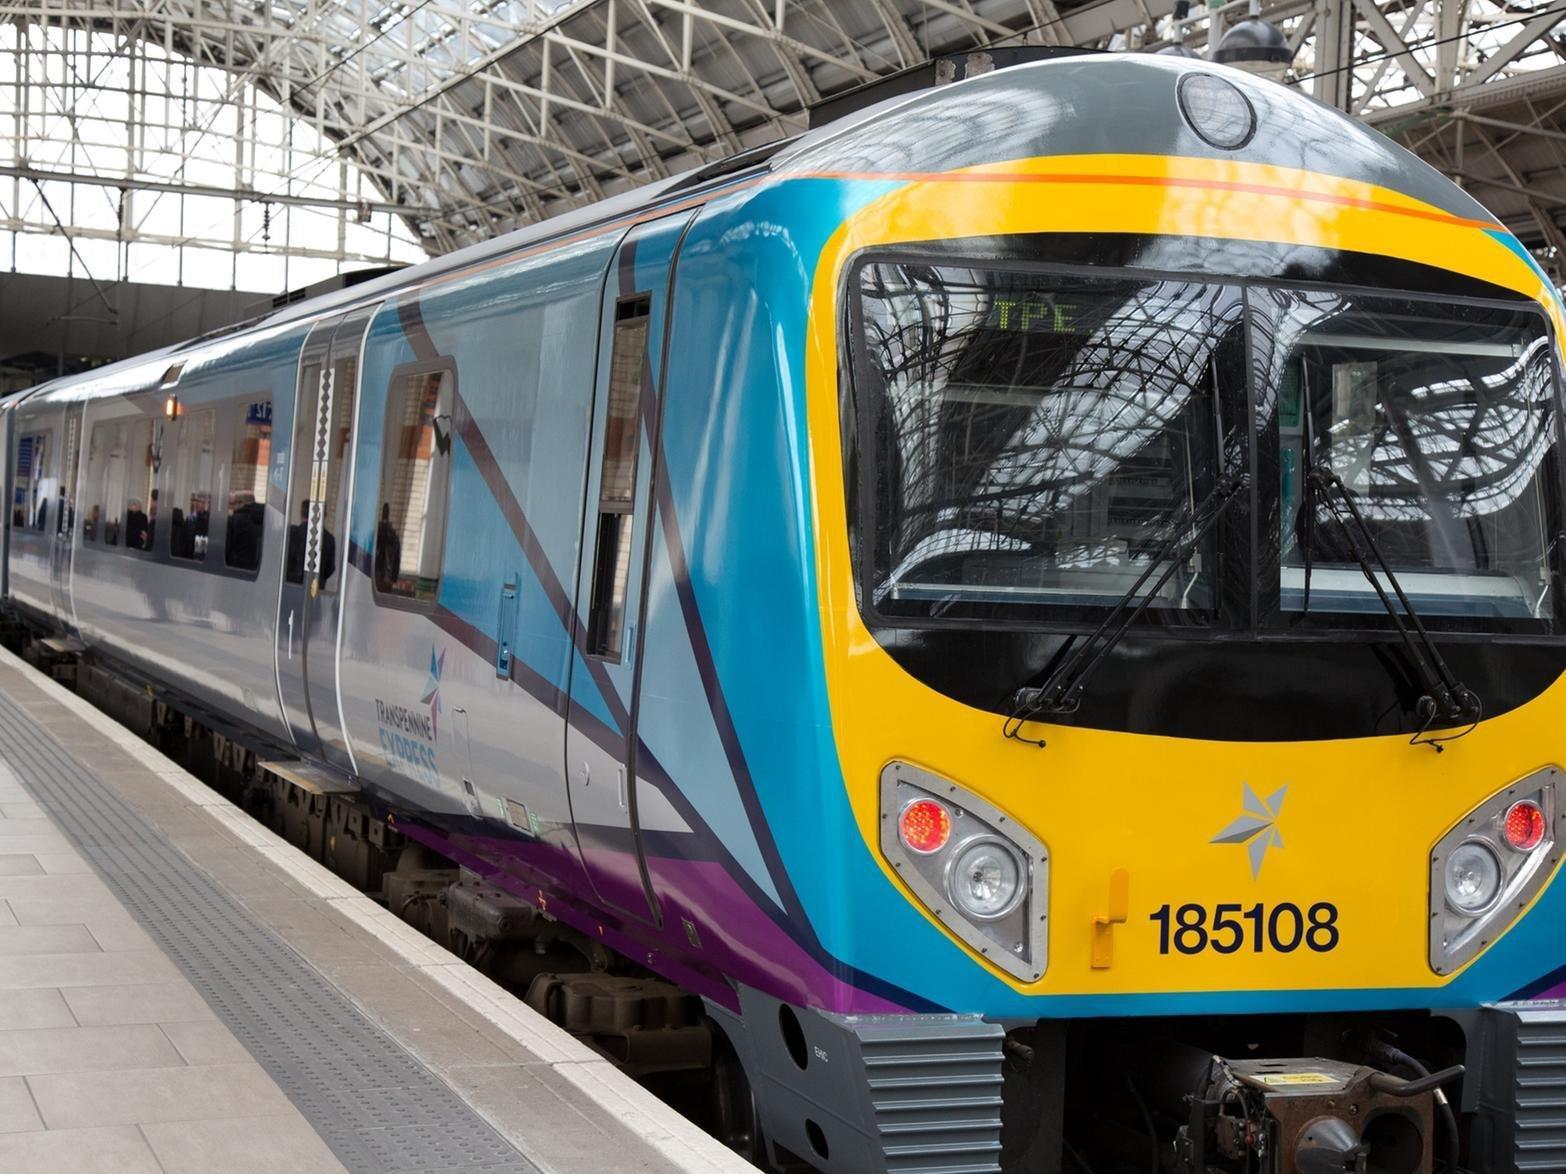 TransPennine Express strike dates: fans heading to Leeds for Manchester United match set to face disruption